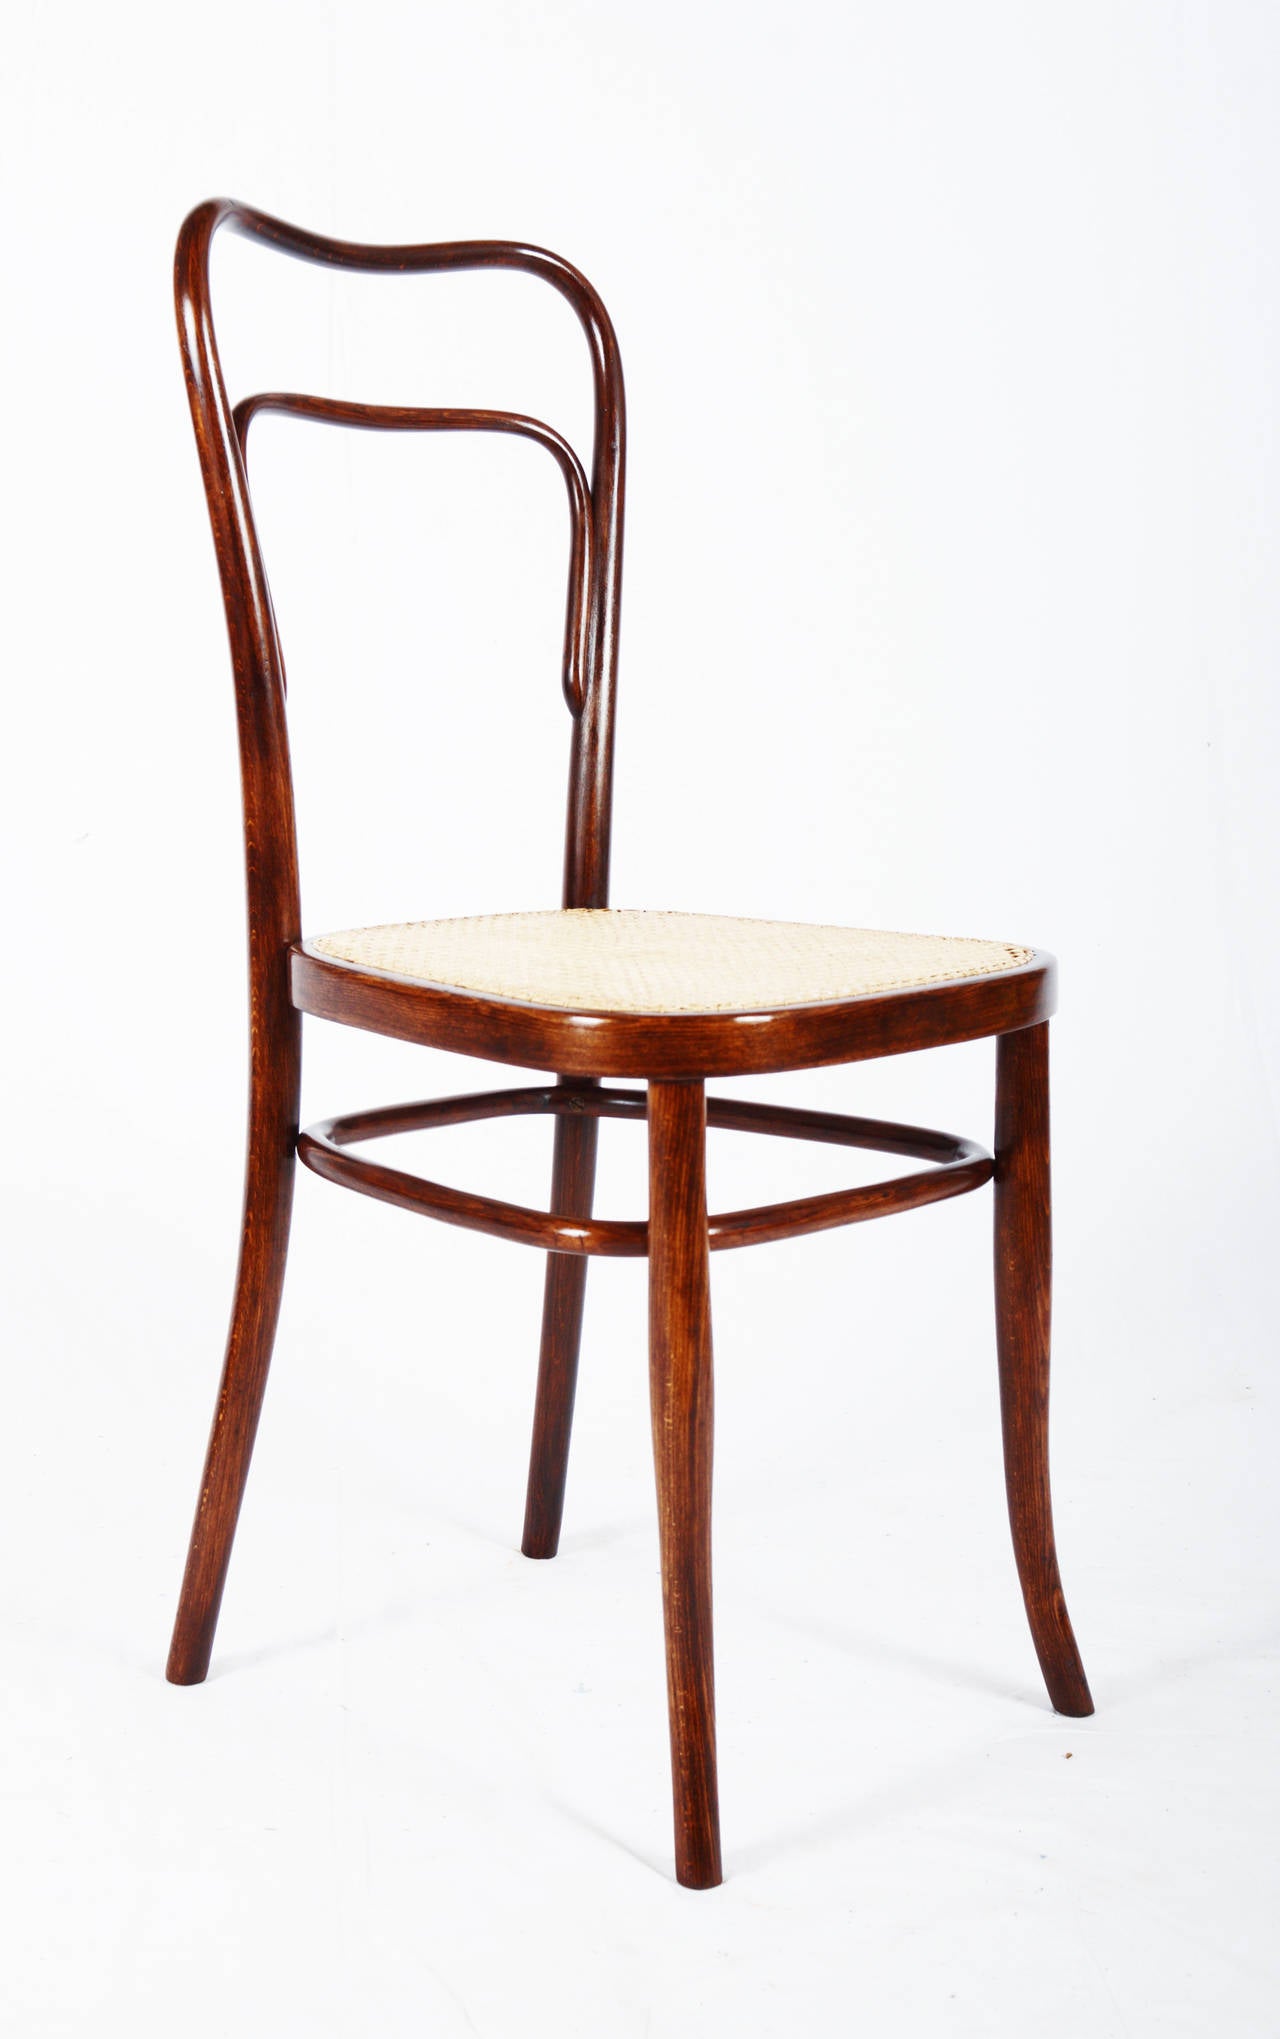 Kohn Bent Wood Chair Attributed to Adolf Loos

fully restored with new canning and shellack finish